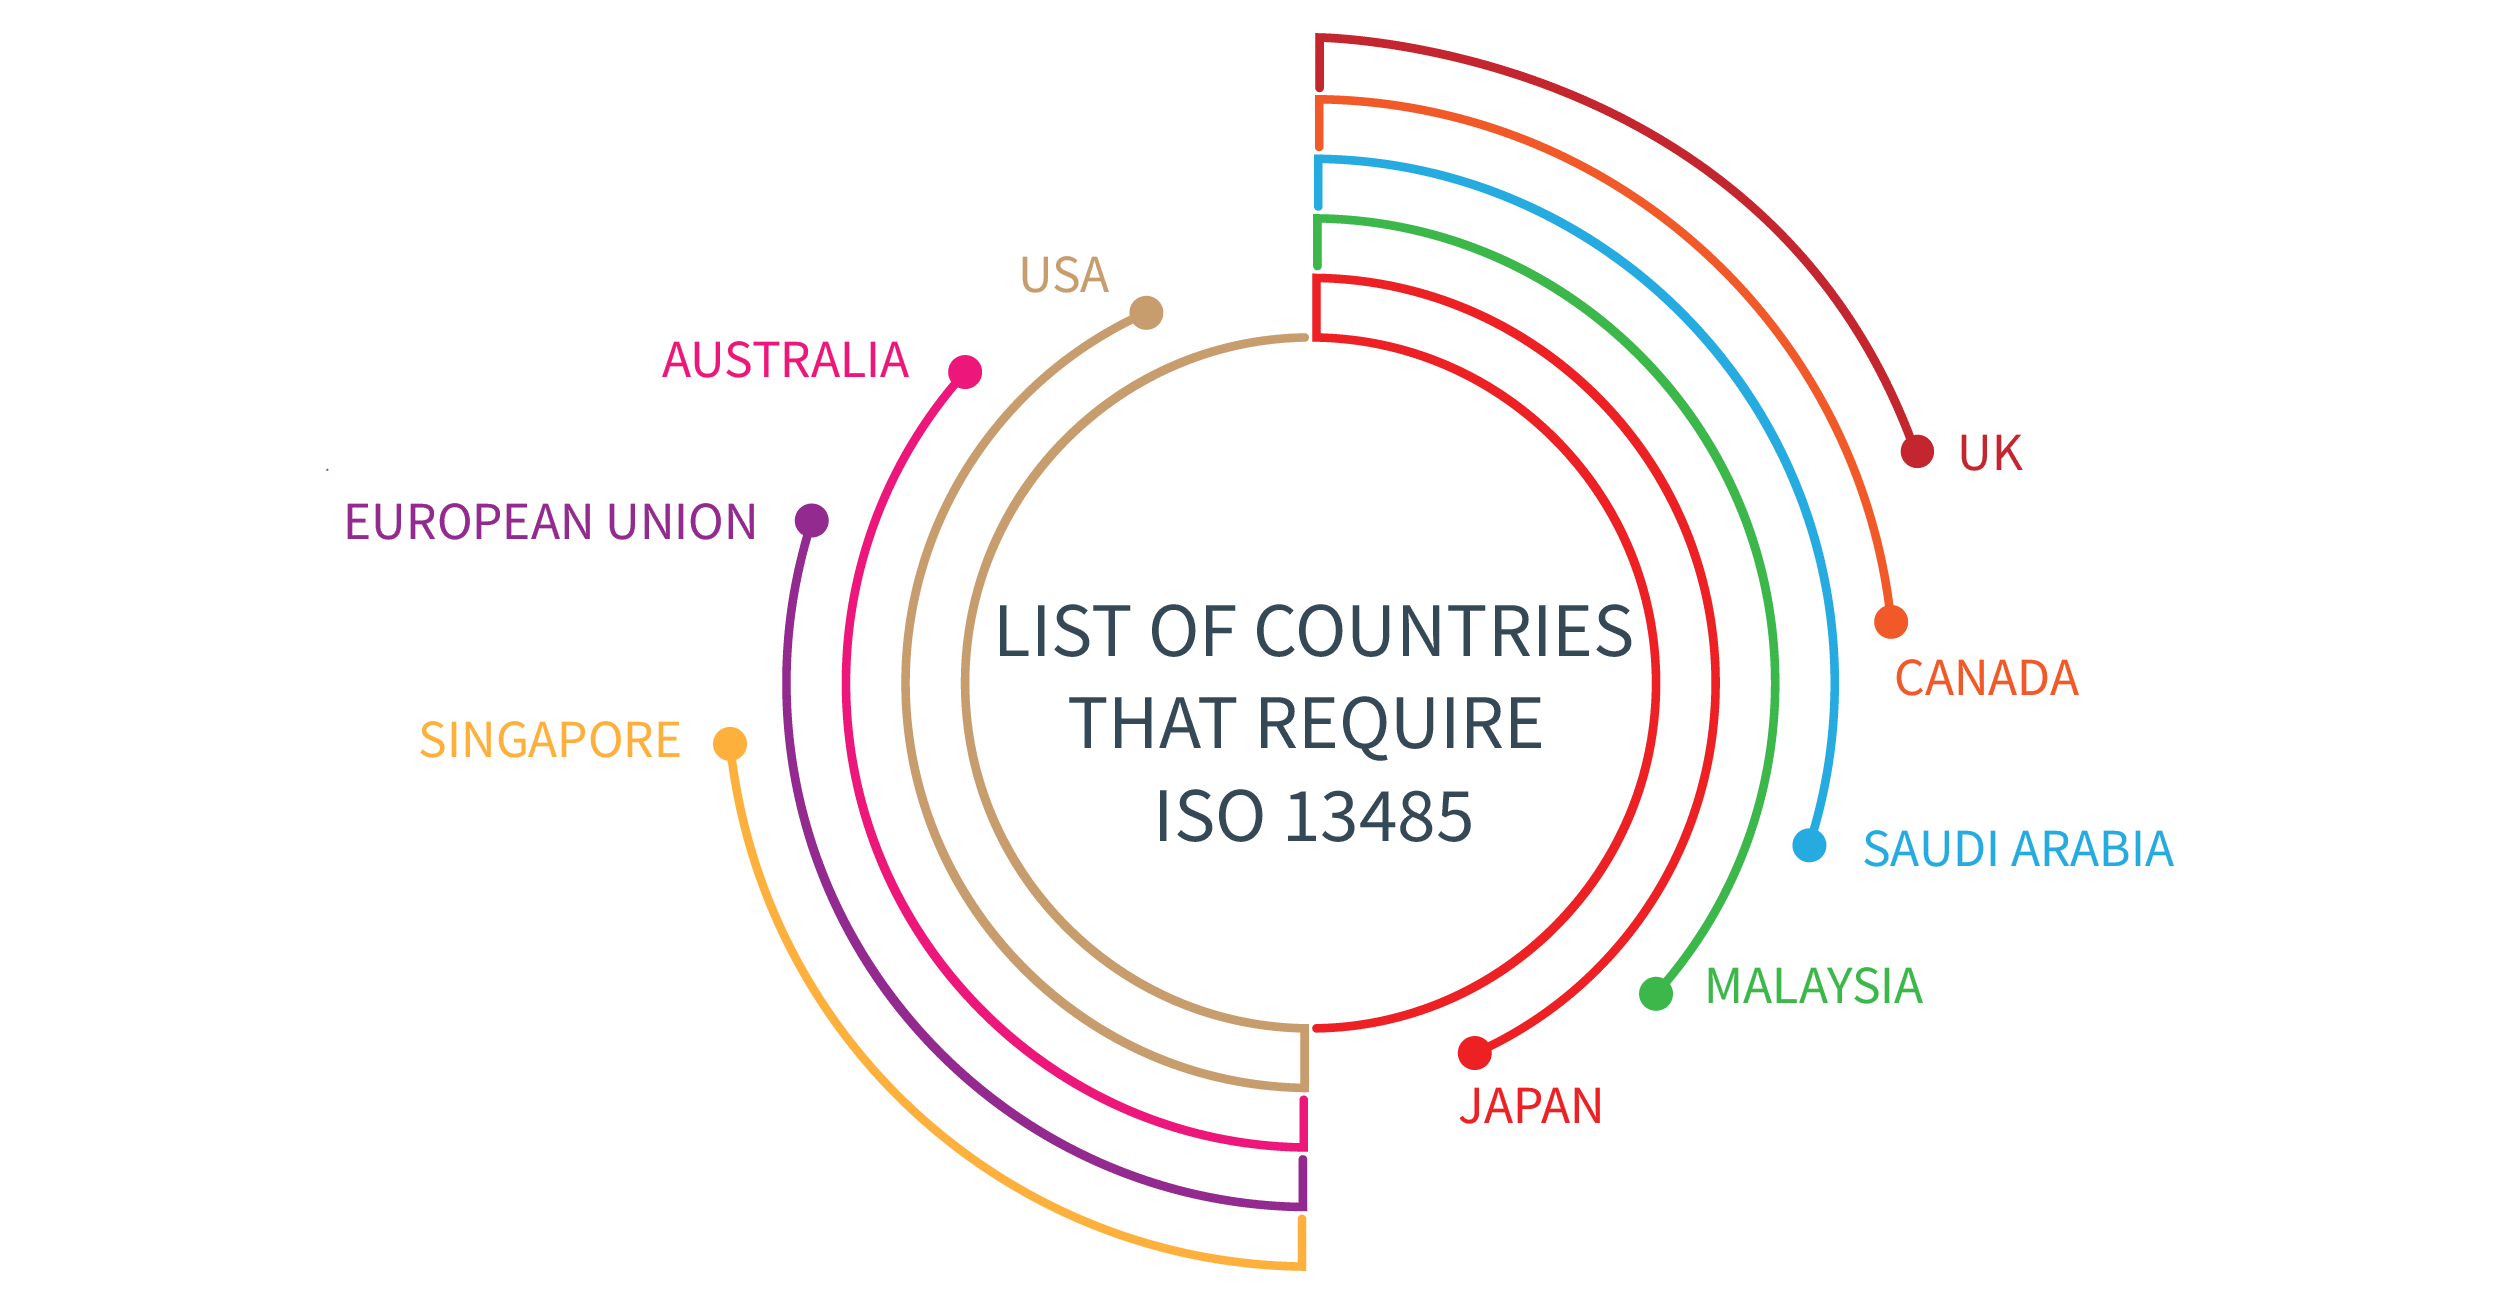 List of countries that require ISO 13485 certification